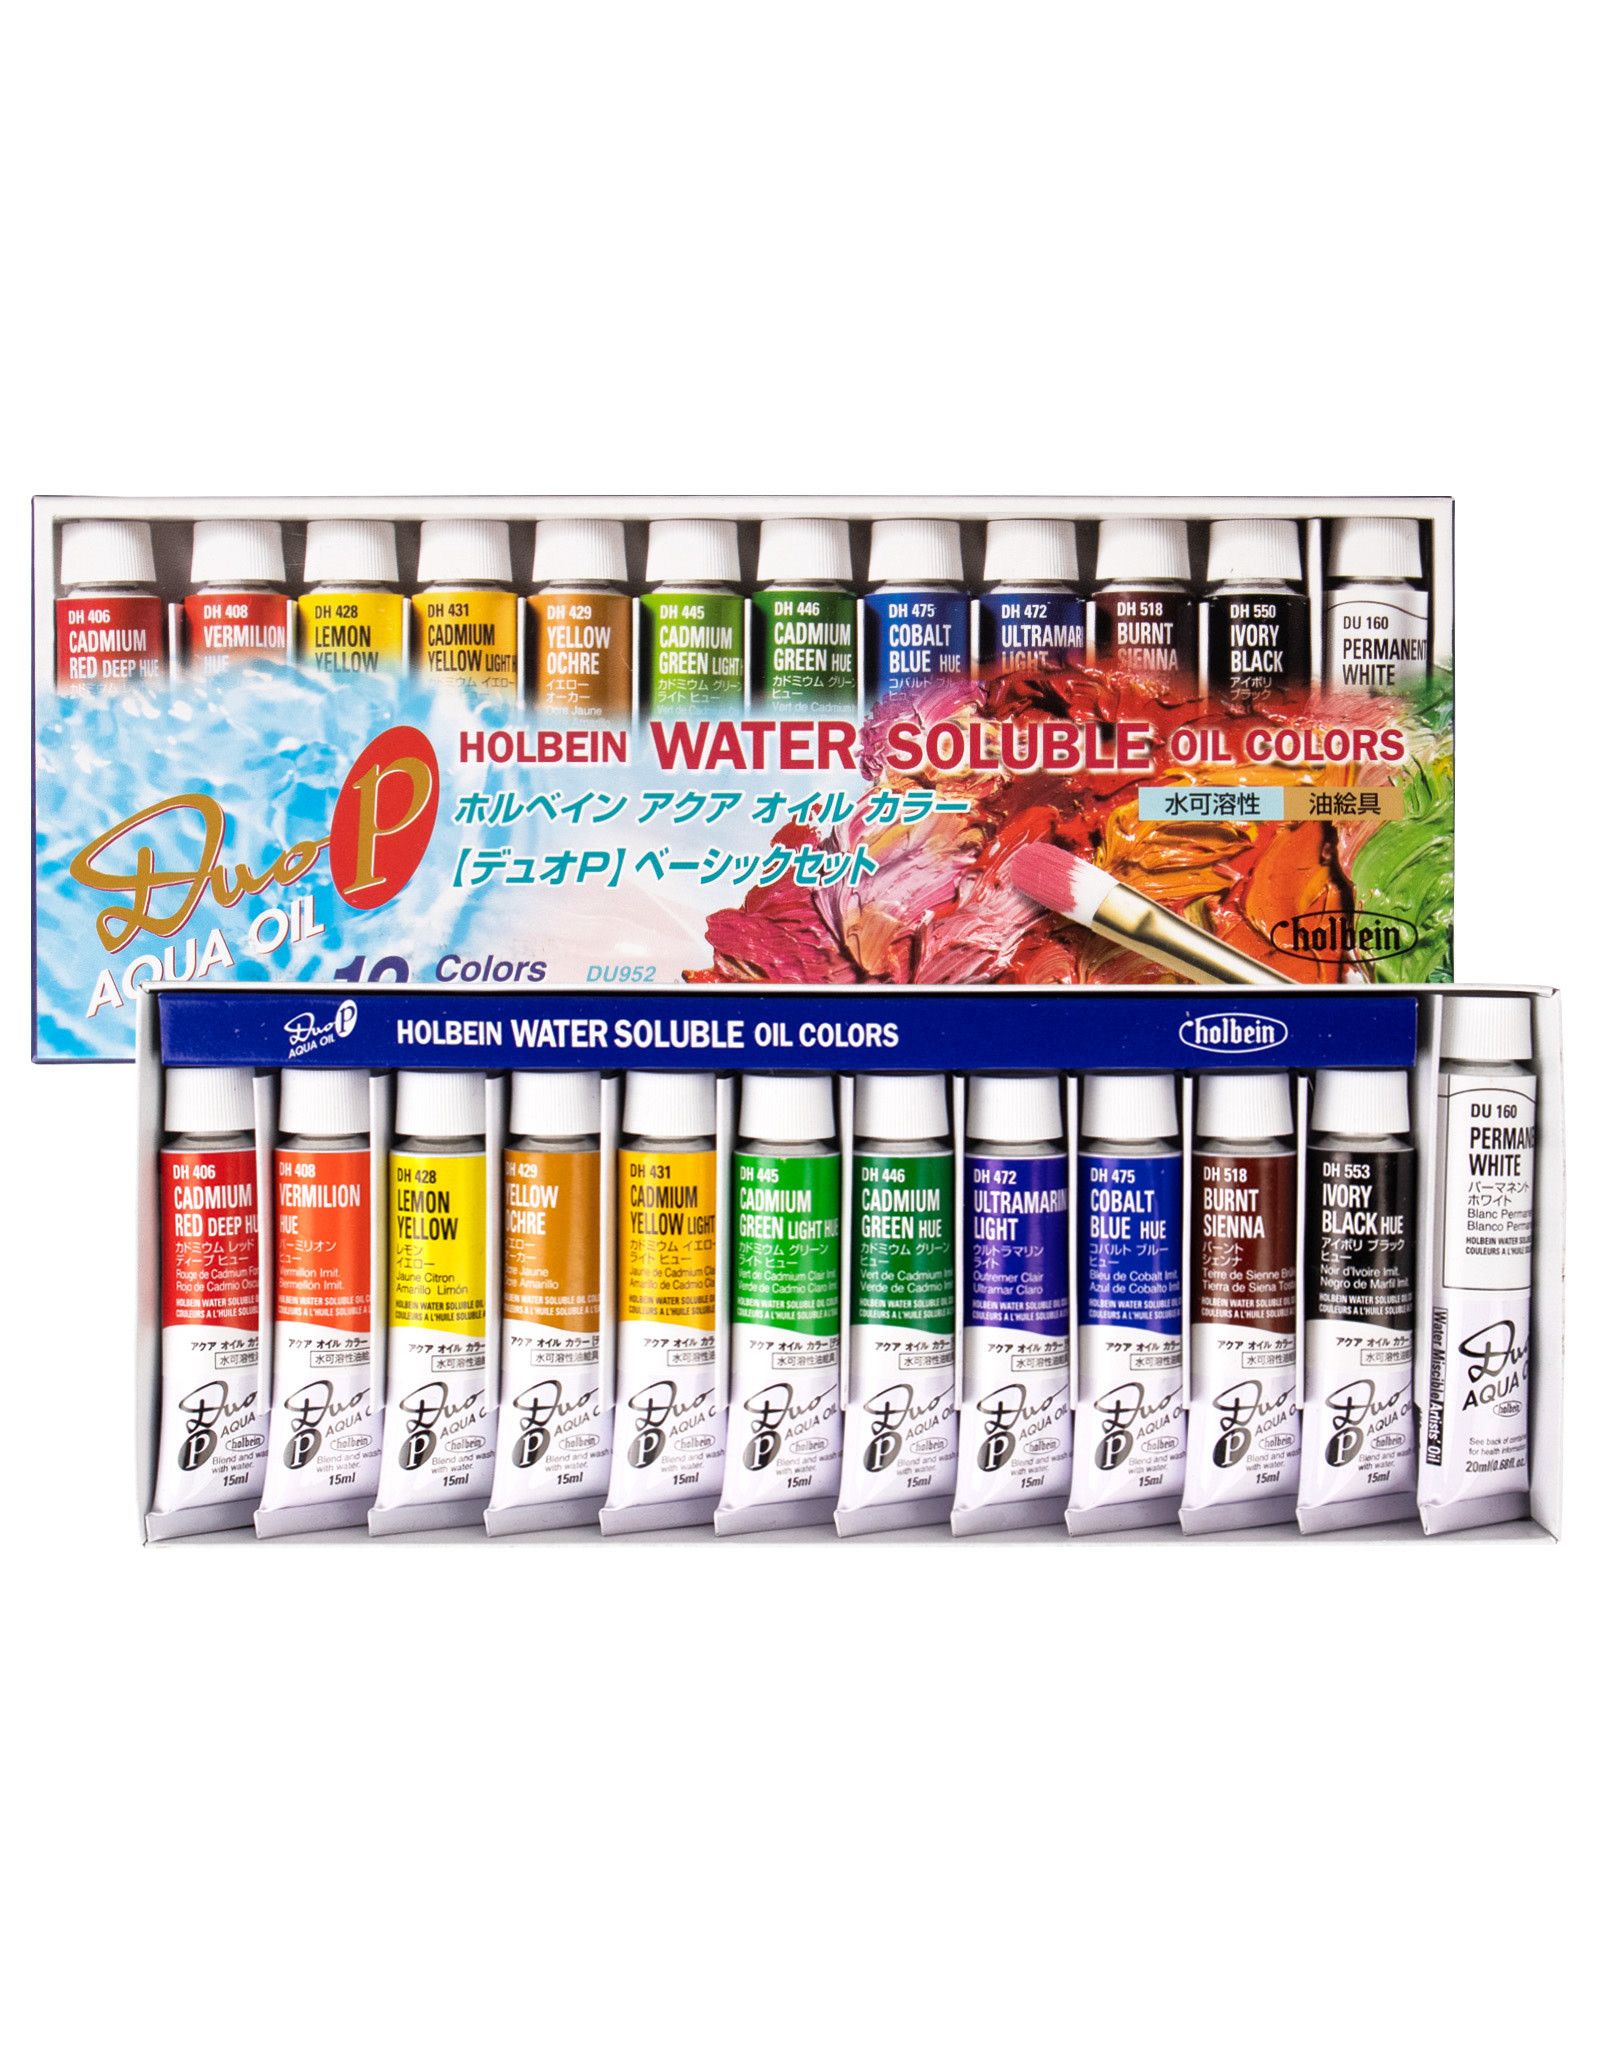 HOLBEIN Holbein DUO Aqua Oil Color, Basic set of 12